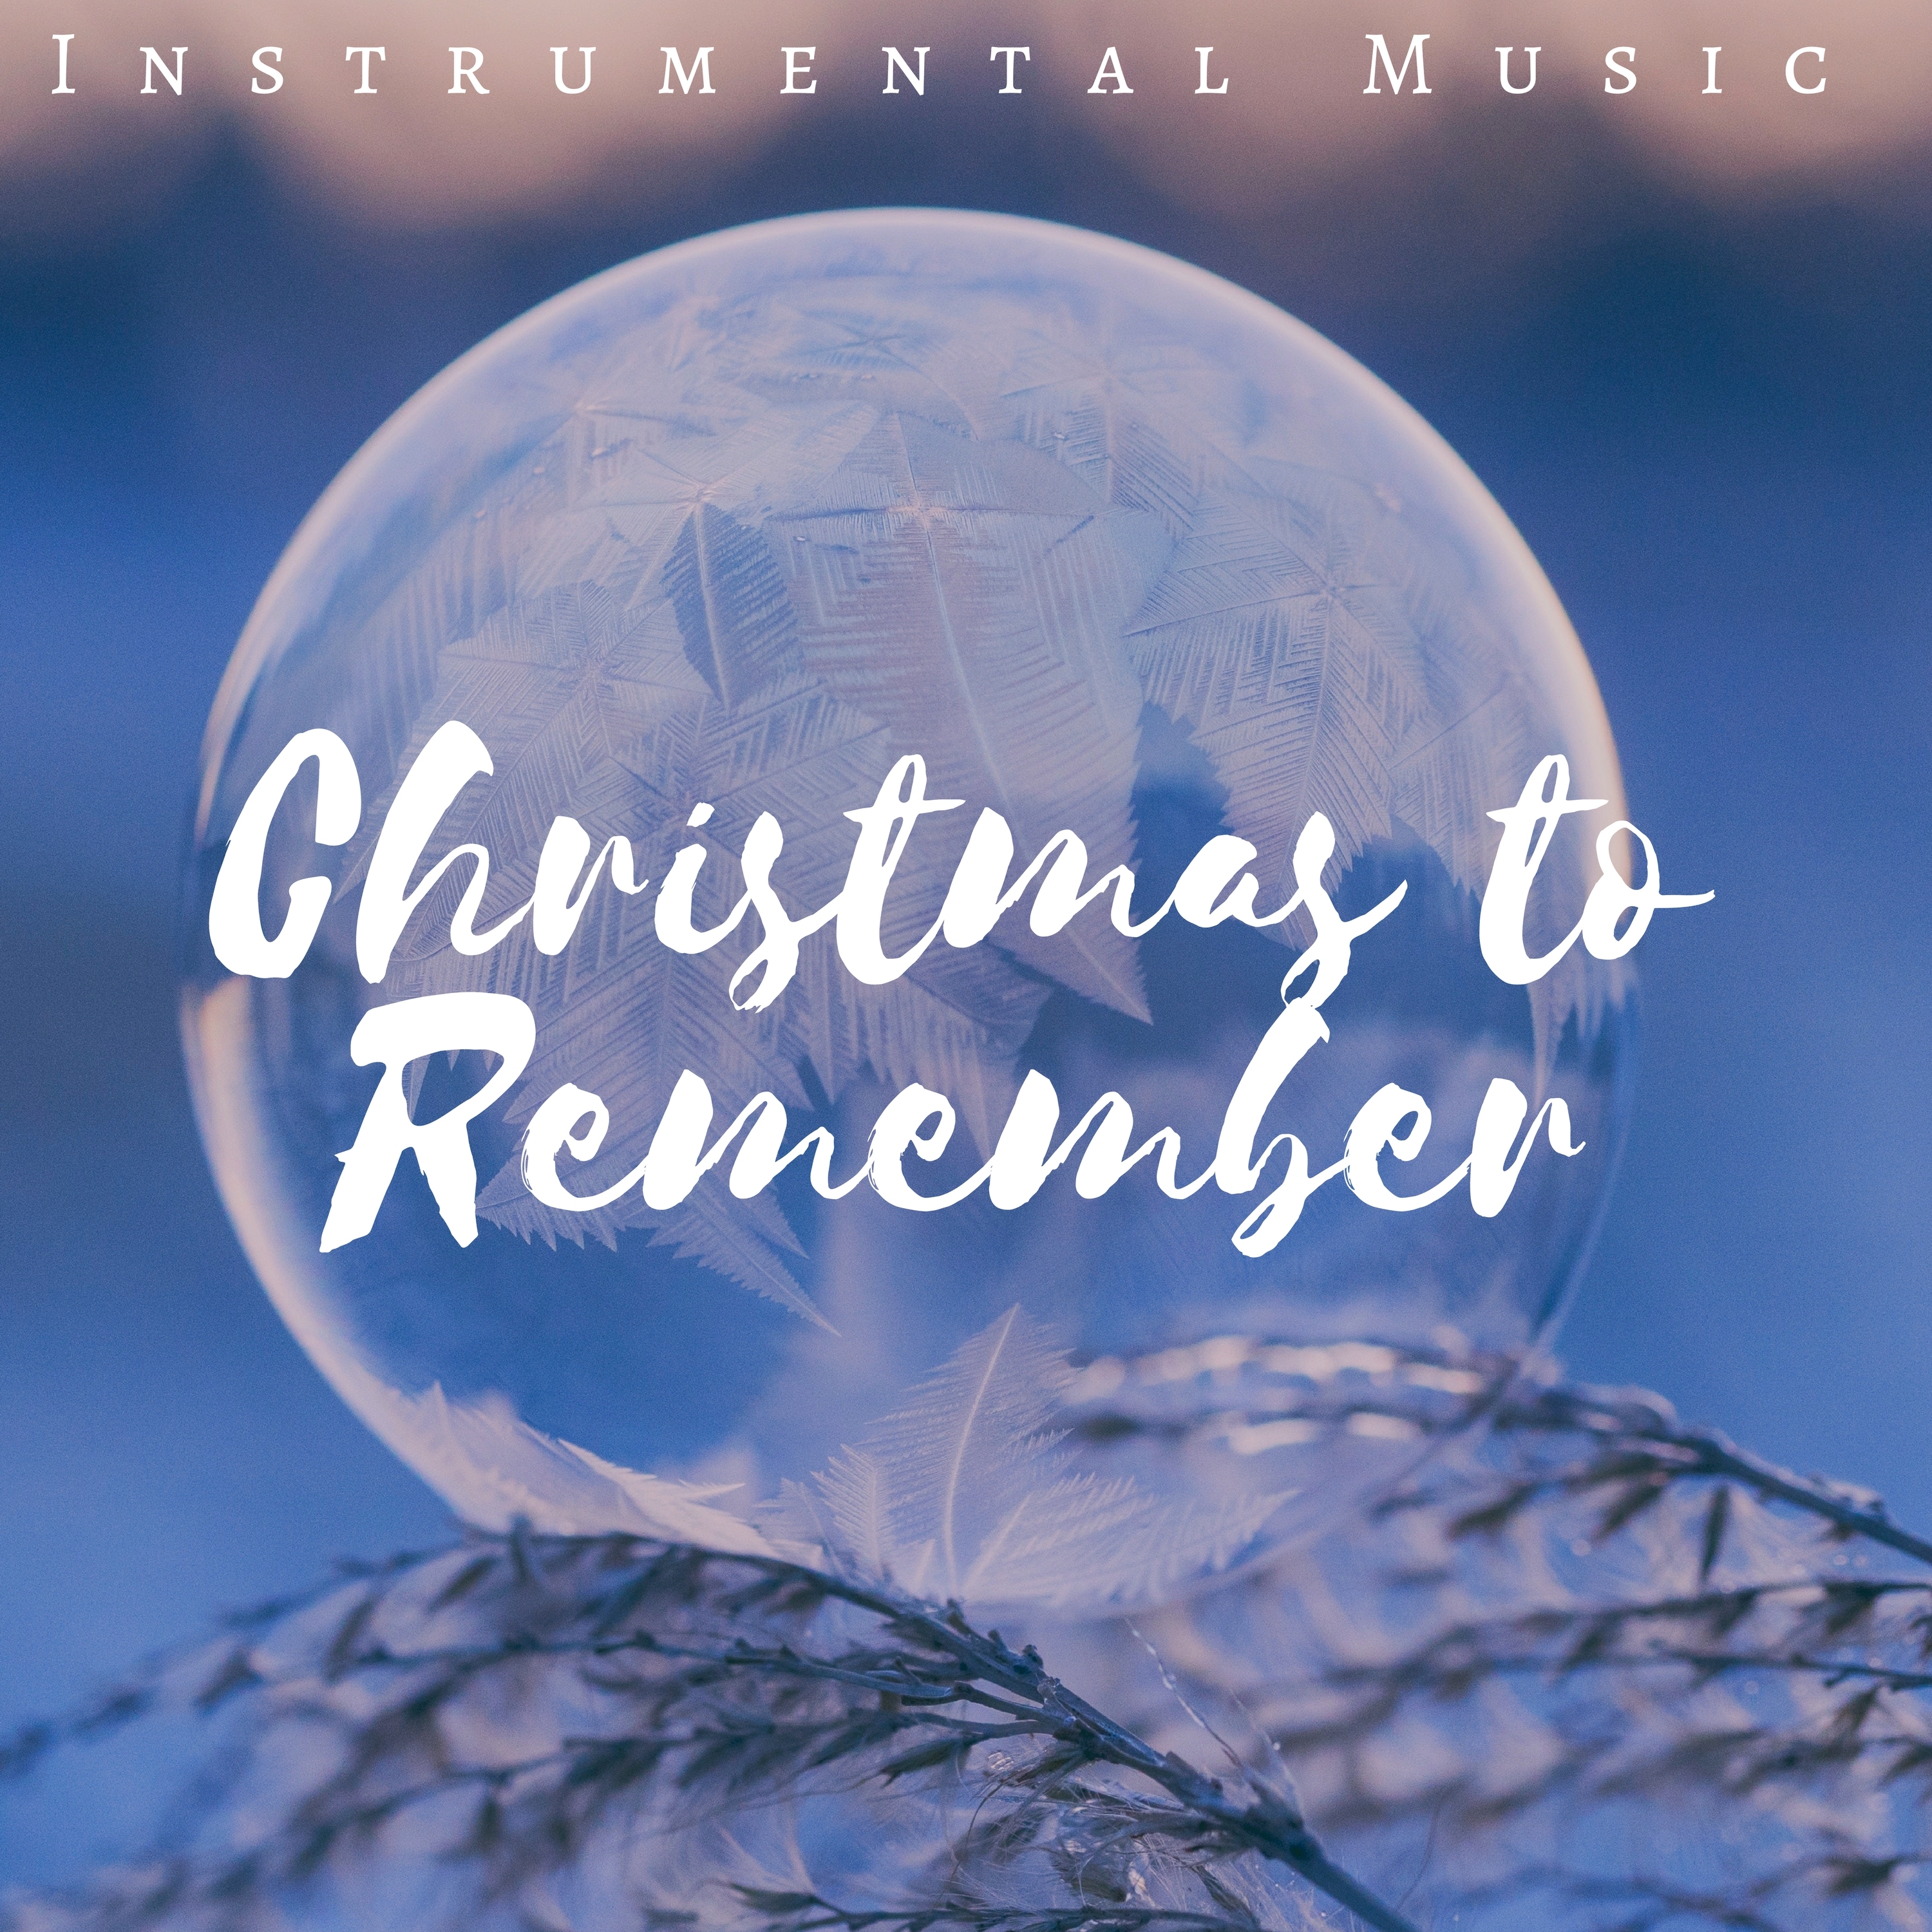 Christmas to Remember: Instrumental Music for Lonely Night, Christmas Story, Snow Fall, White Angel